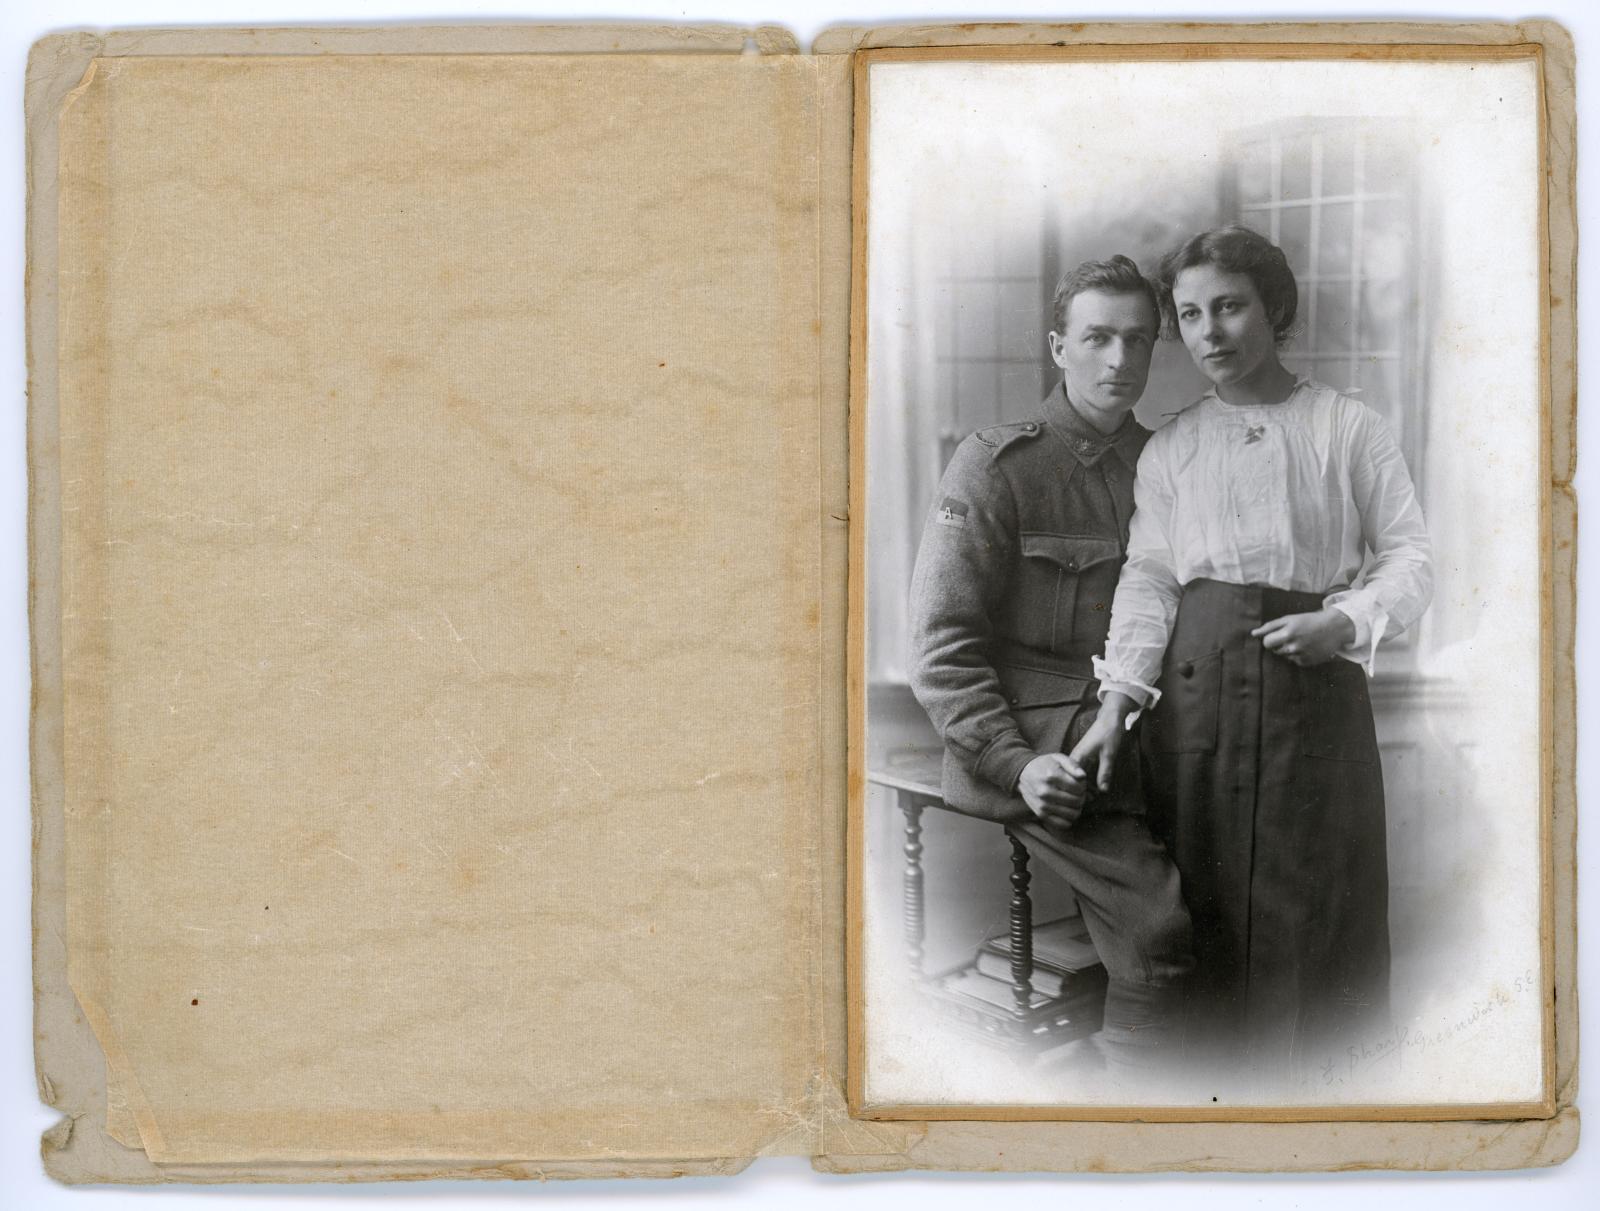 Black & white photograph of Pte. ROBINS & wife